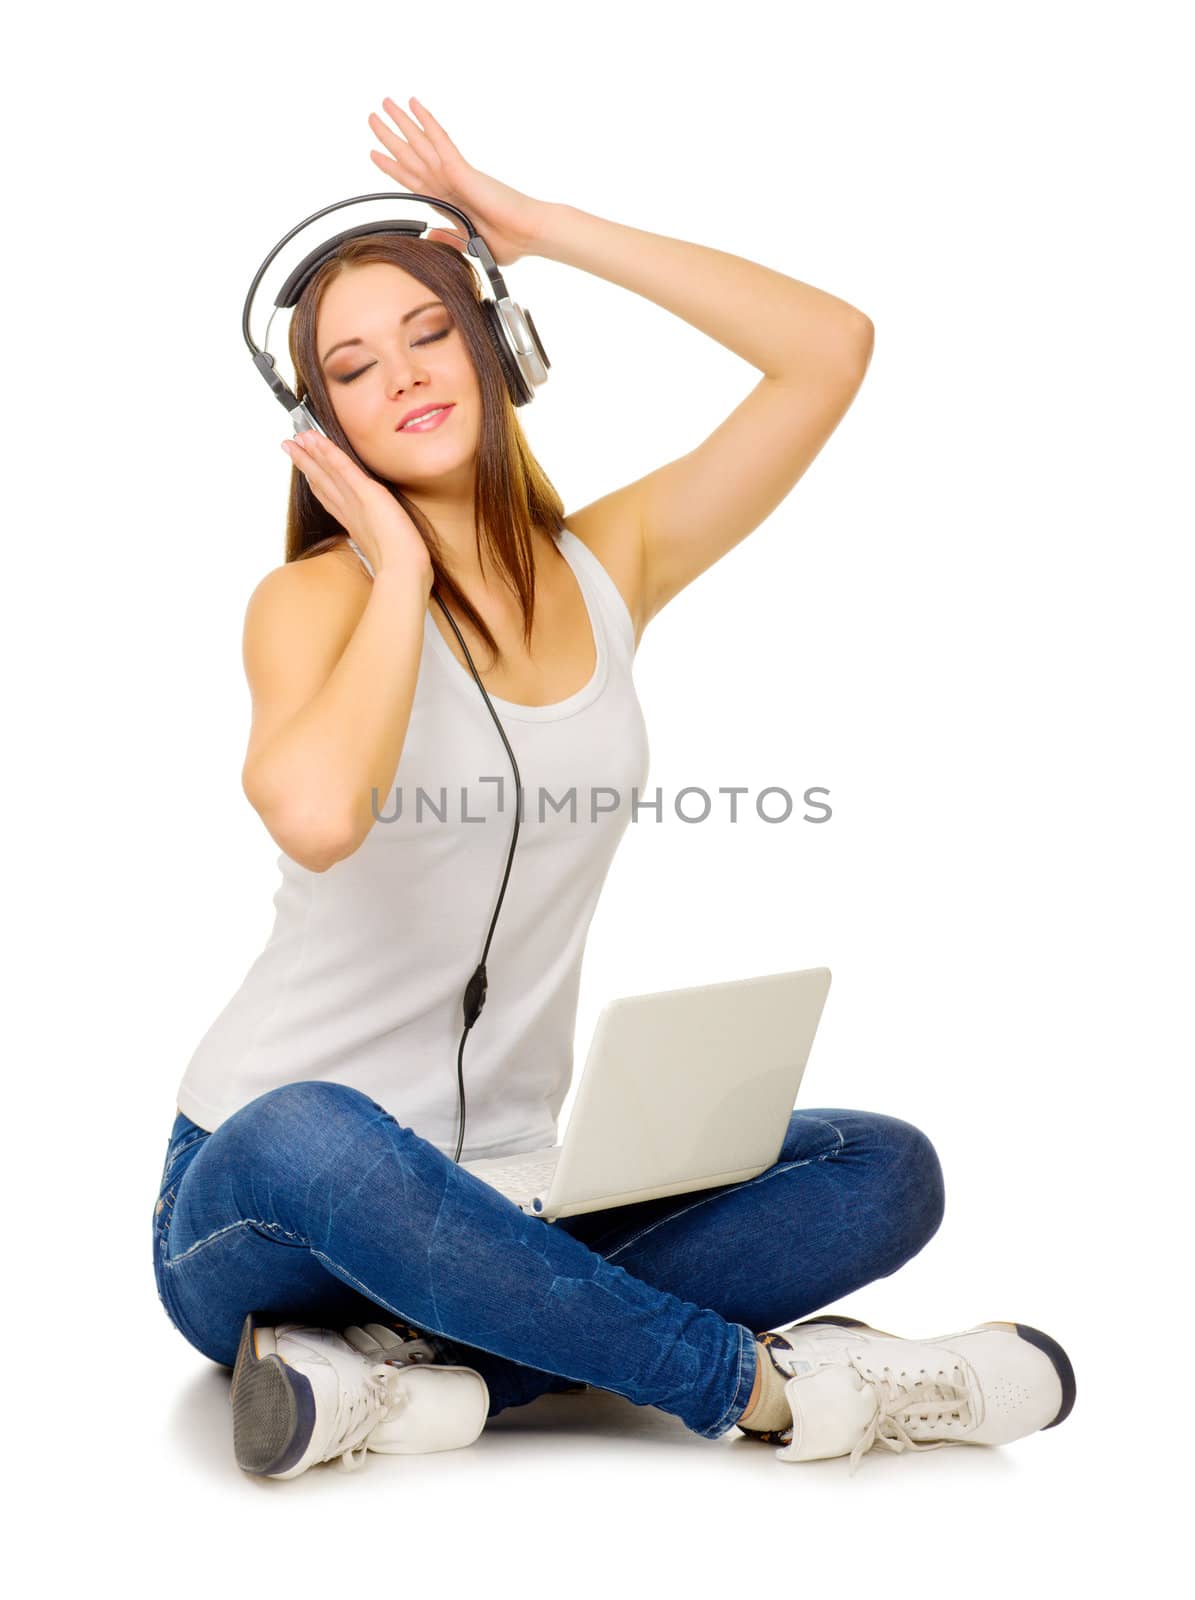 Young girl with headphones by rbv